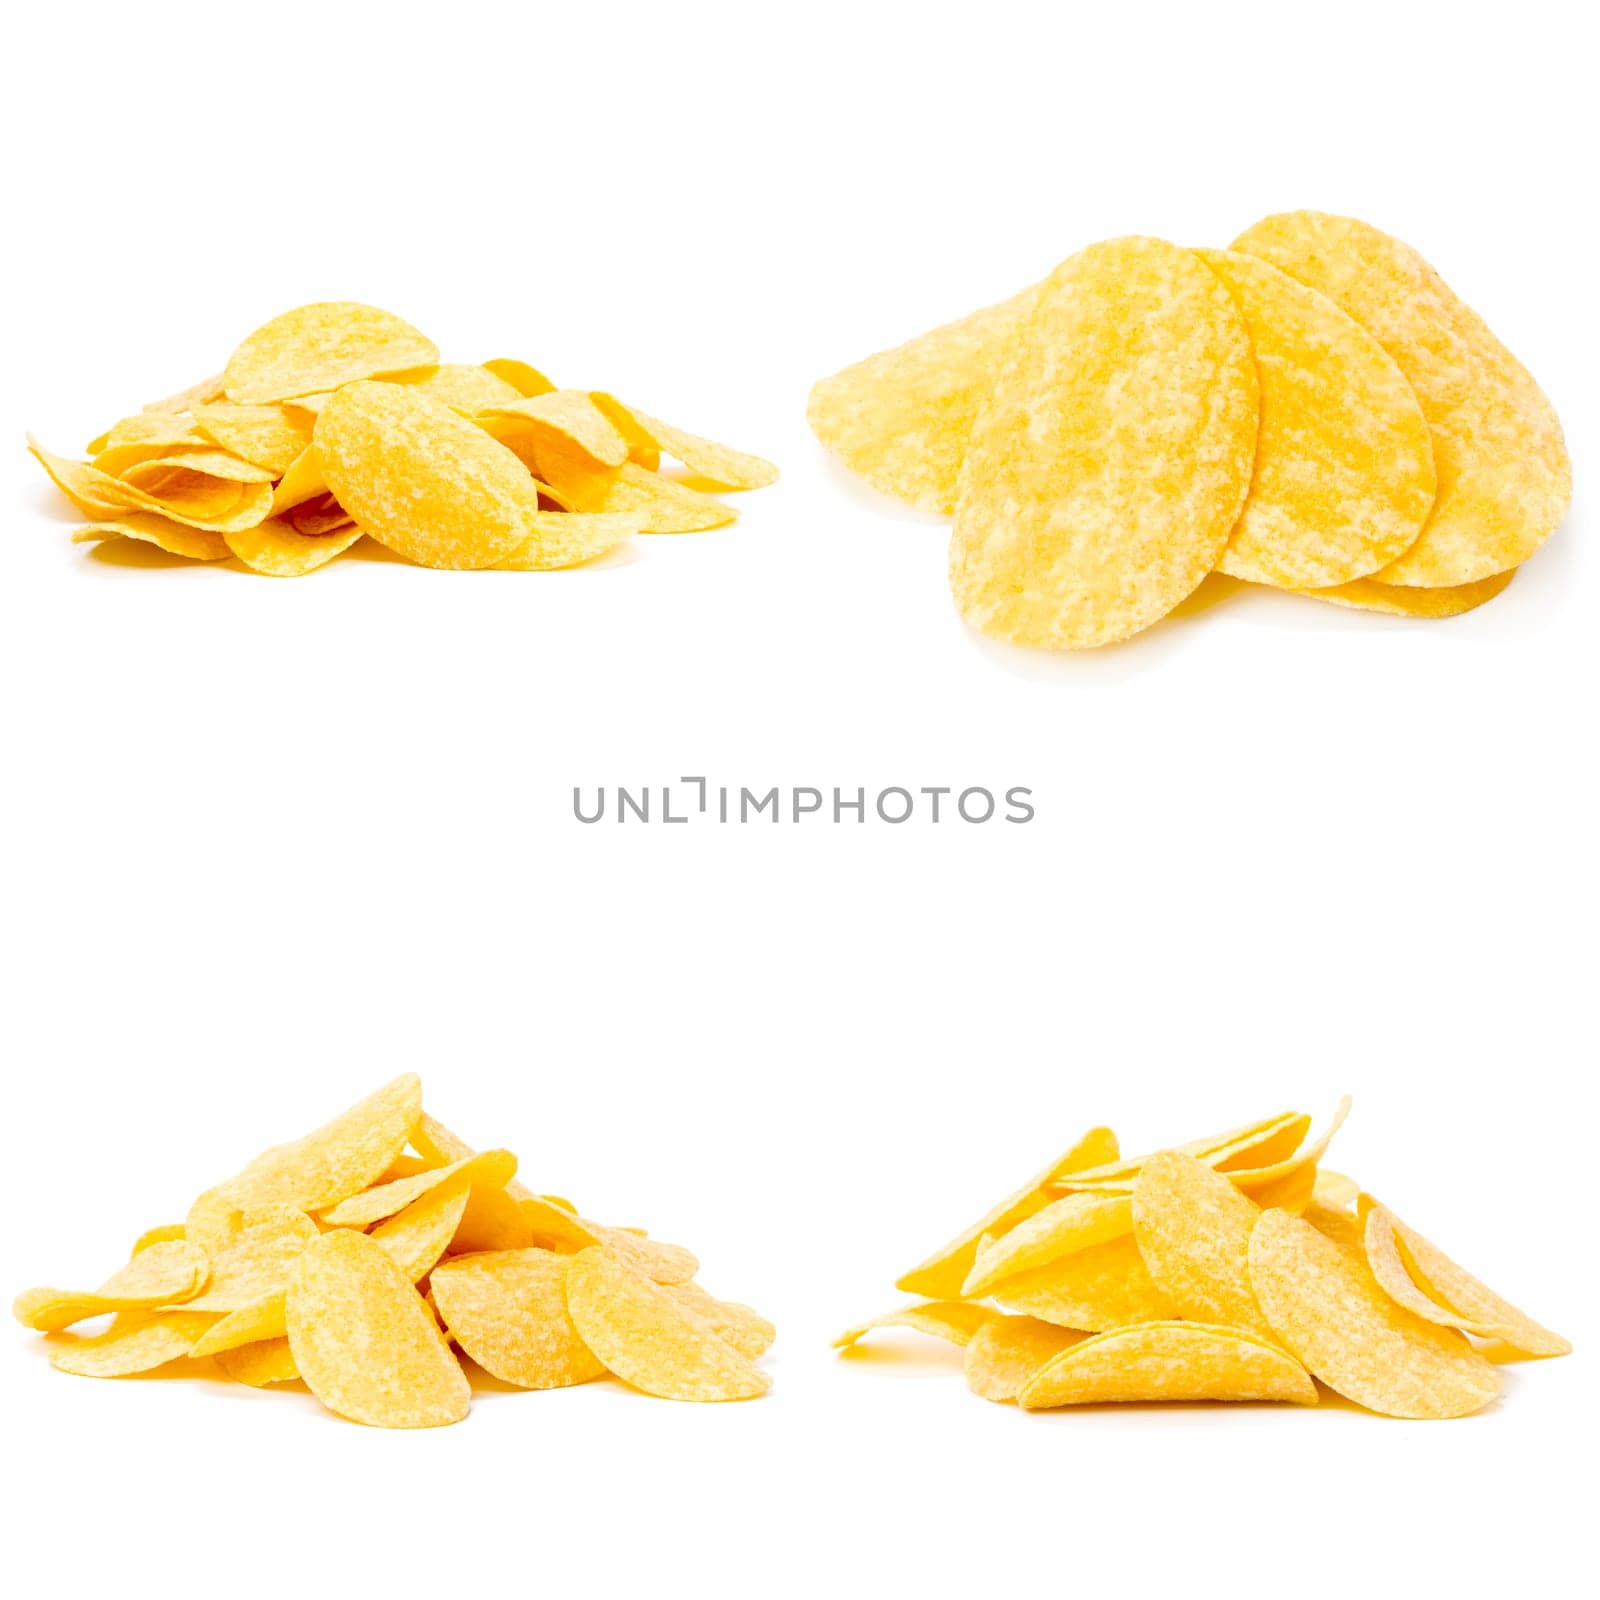 Collage of tasty potato chips by Fabrikasimf